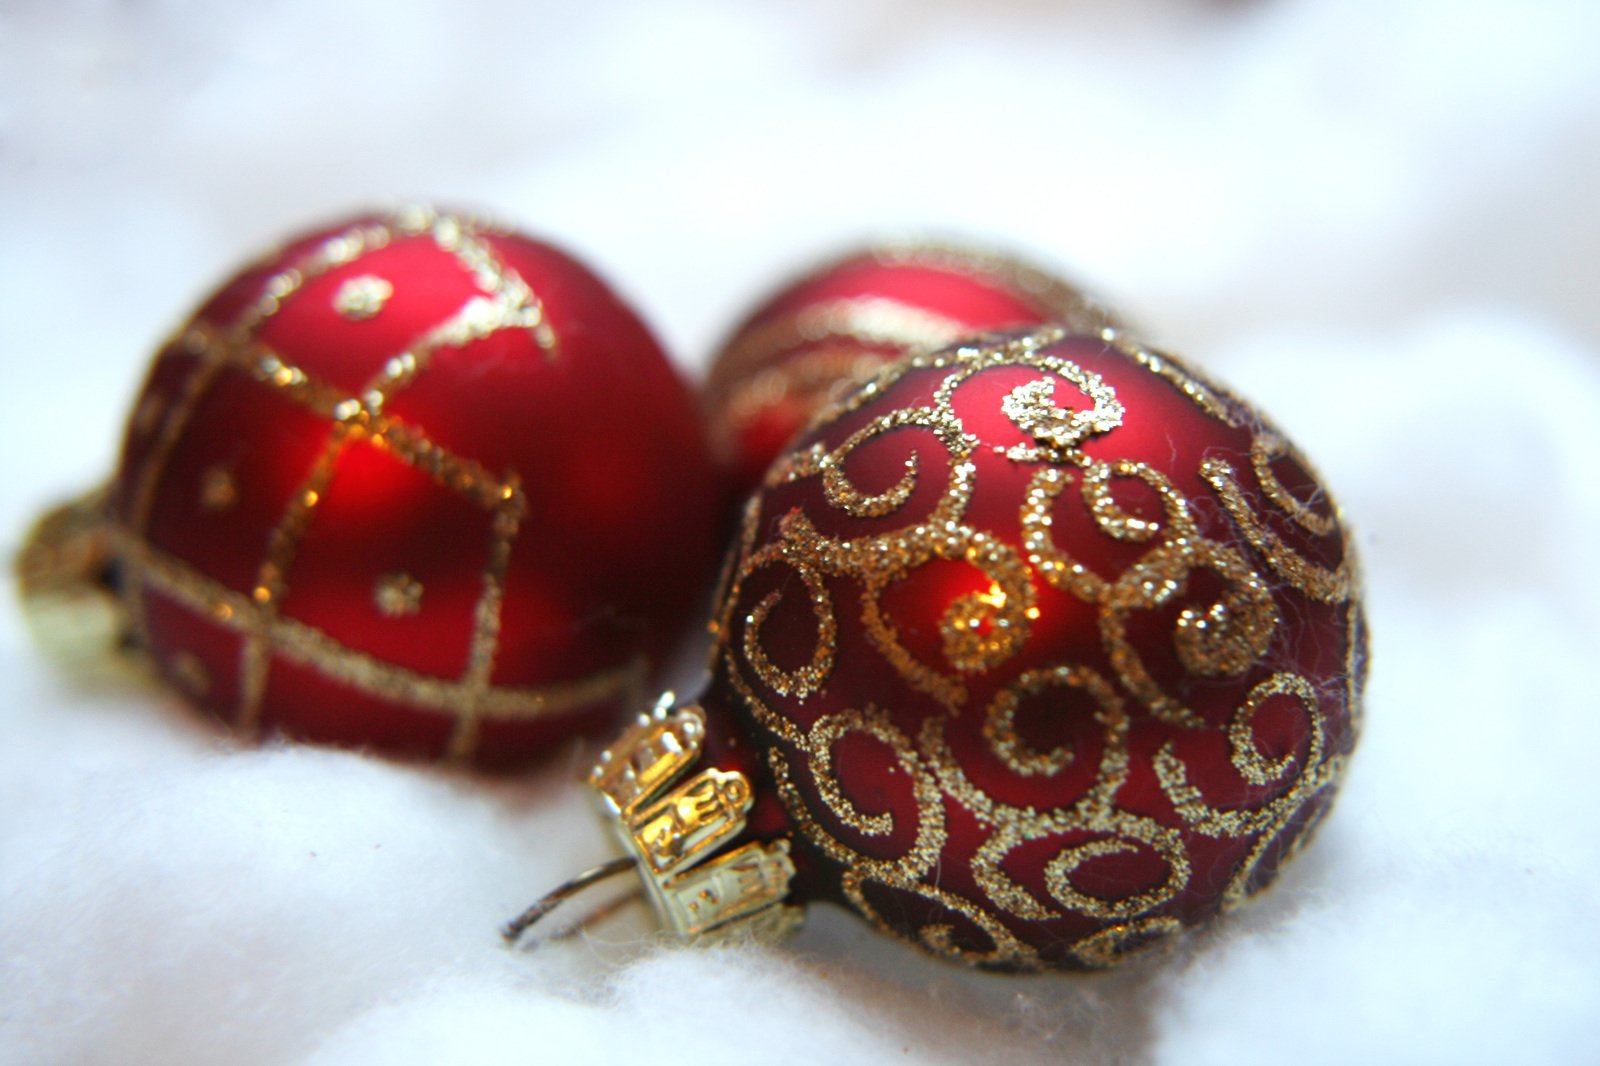 two red ornaments in gold foil on a white surface